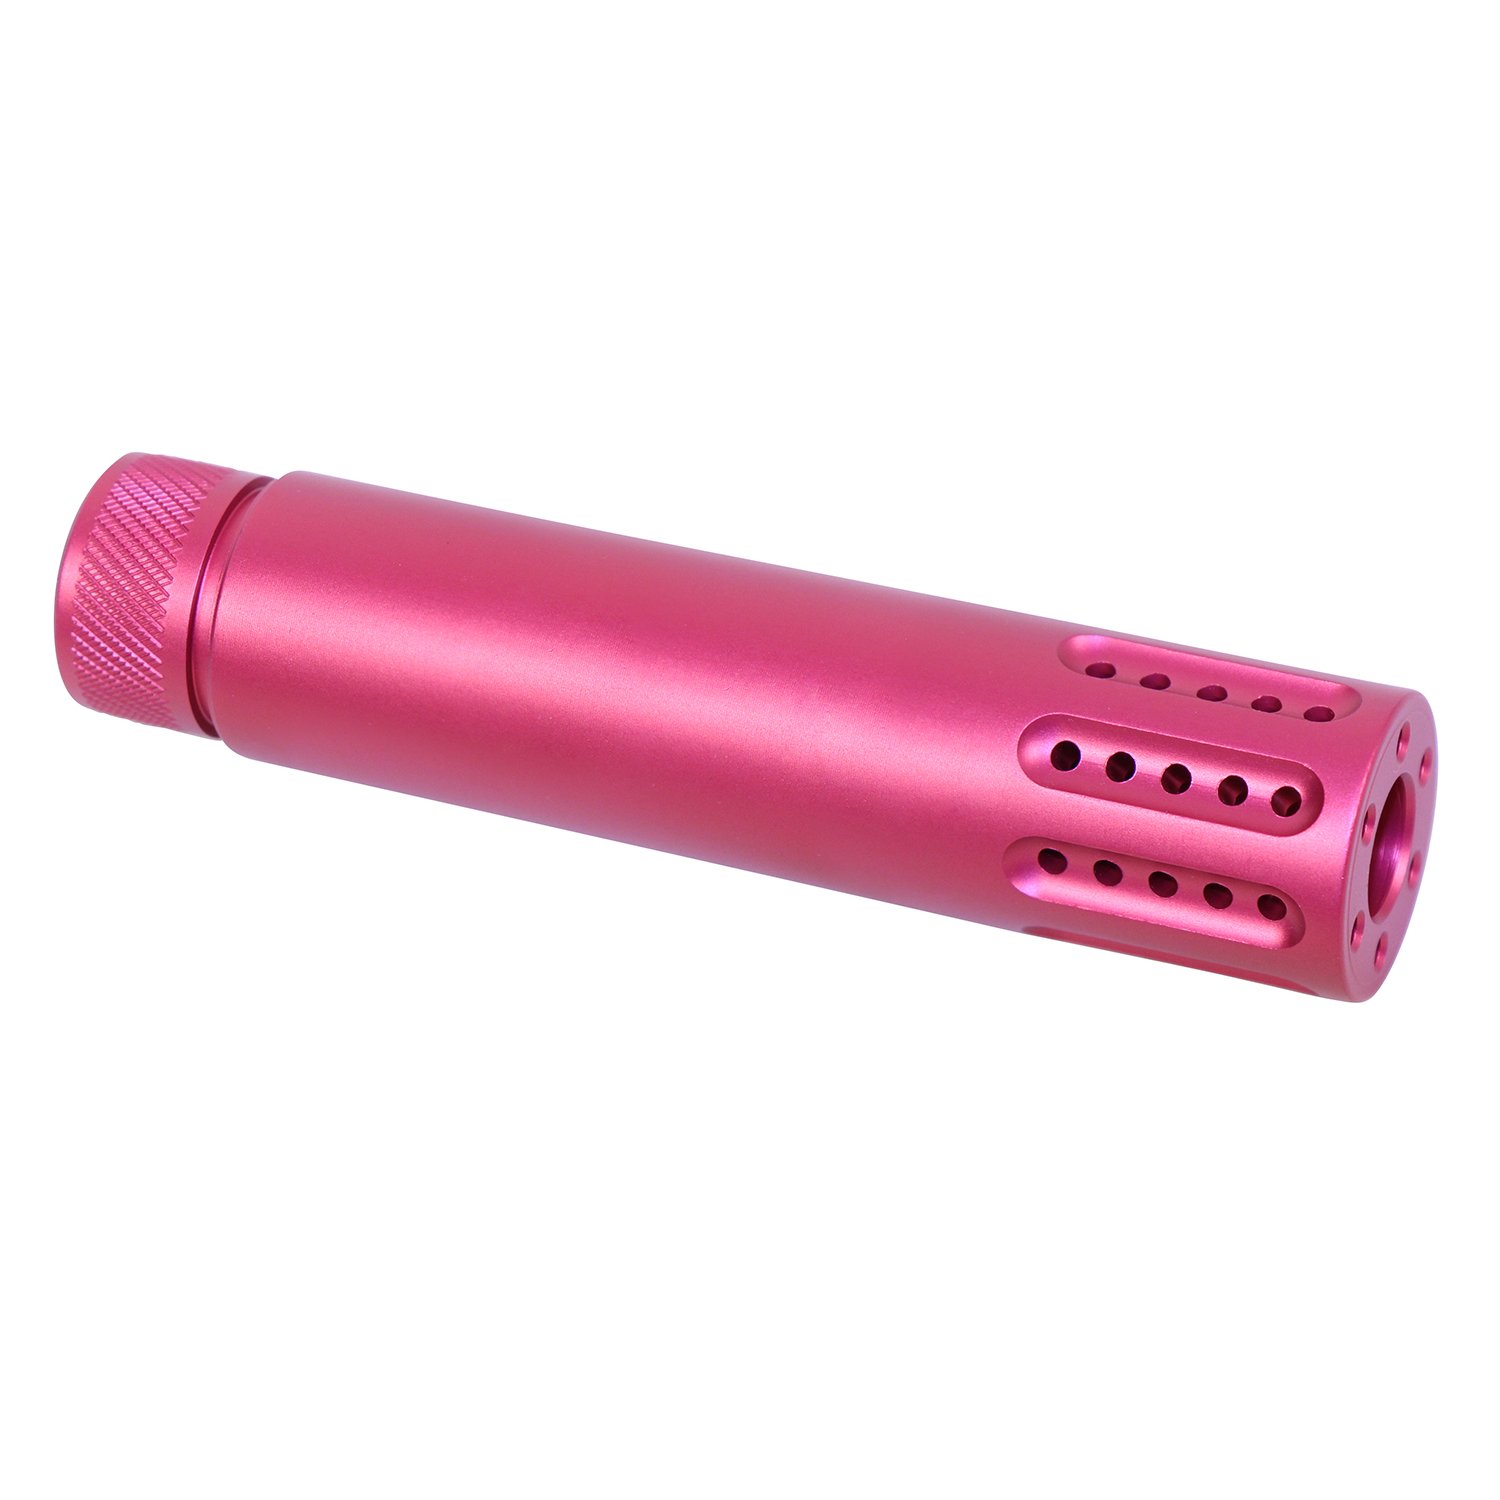 Anodized rose-colored AR-15 muzzle brake with a barrel shroud